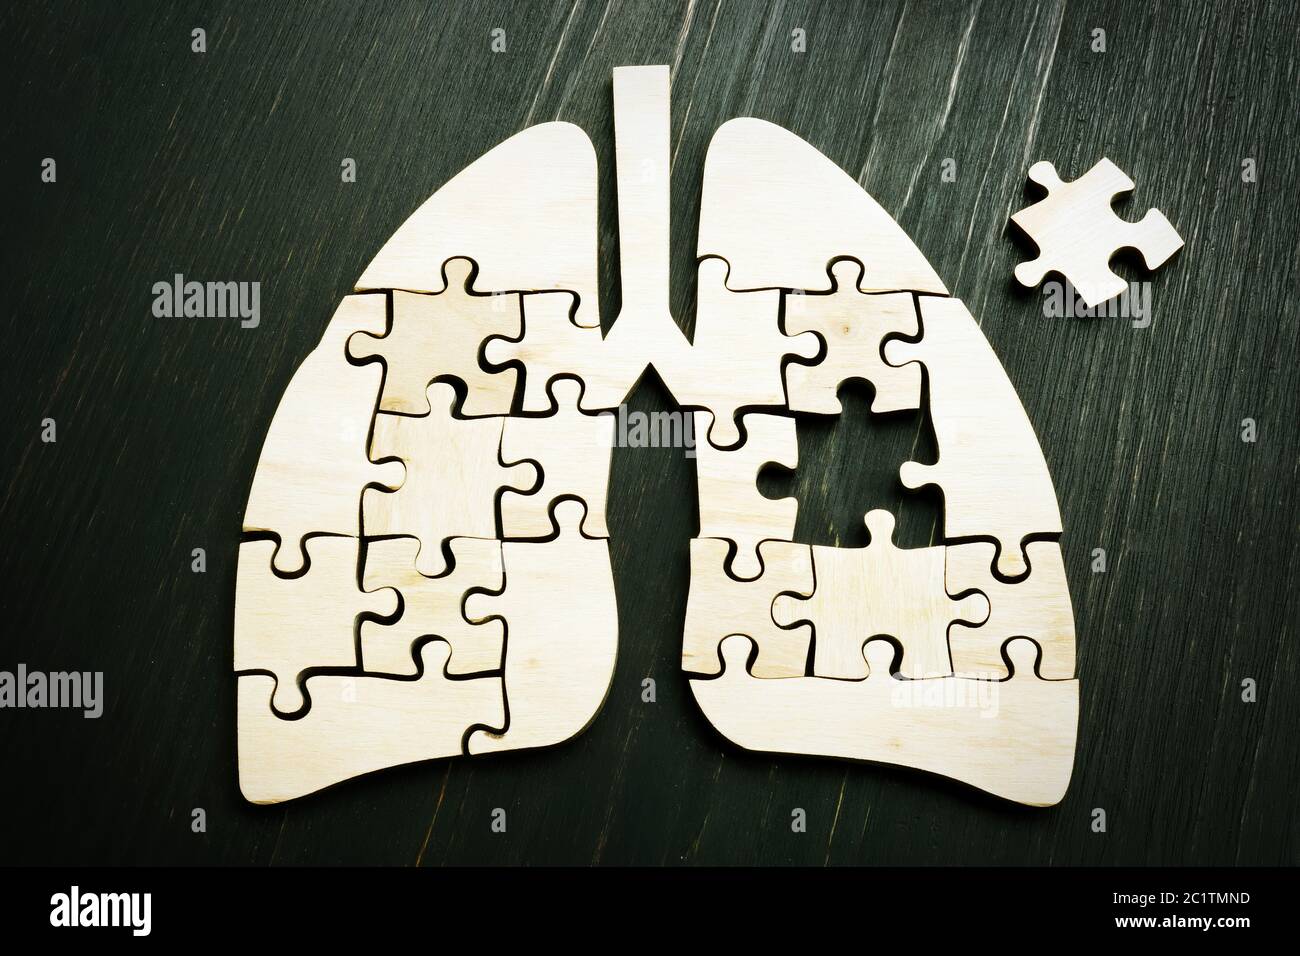 Lung cancer or respiratory disease concept. Wooden puzzle on the dark surface. Stock Photo